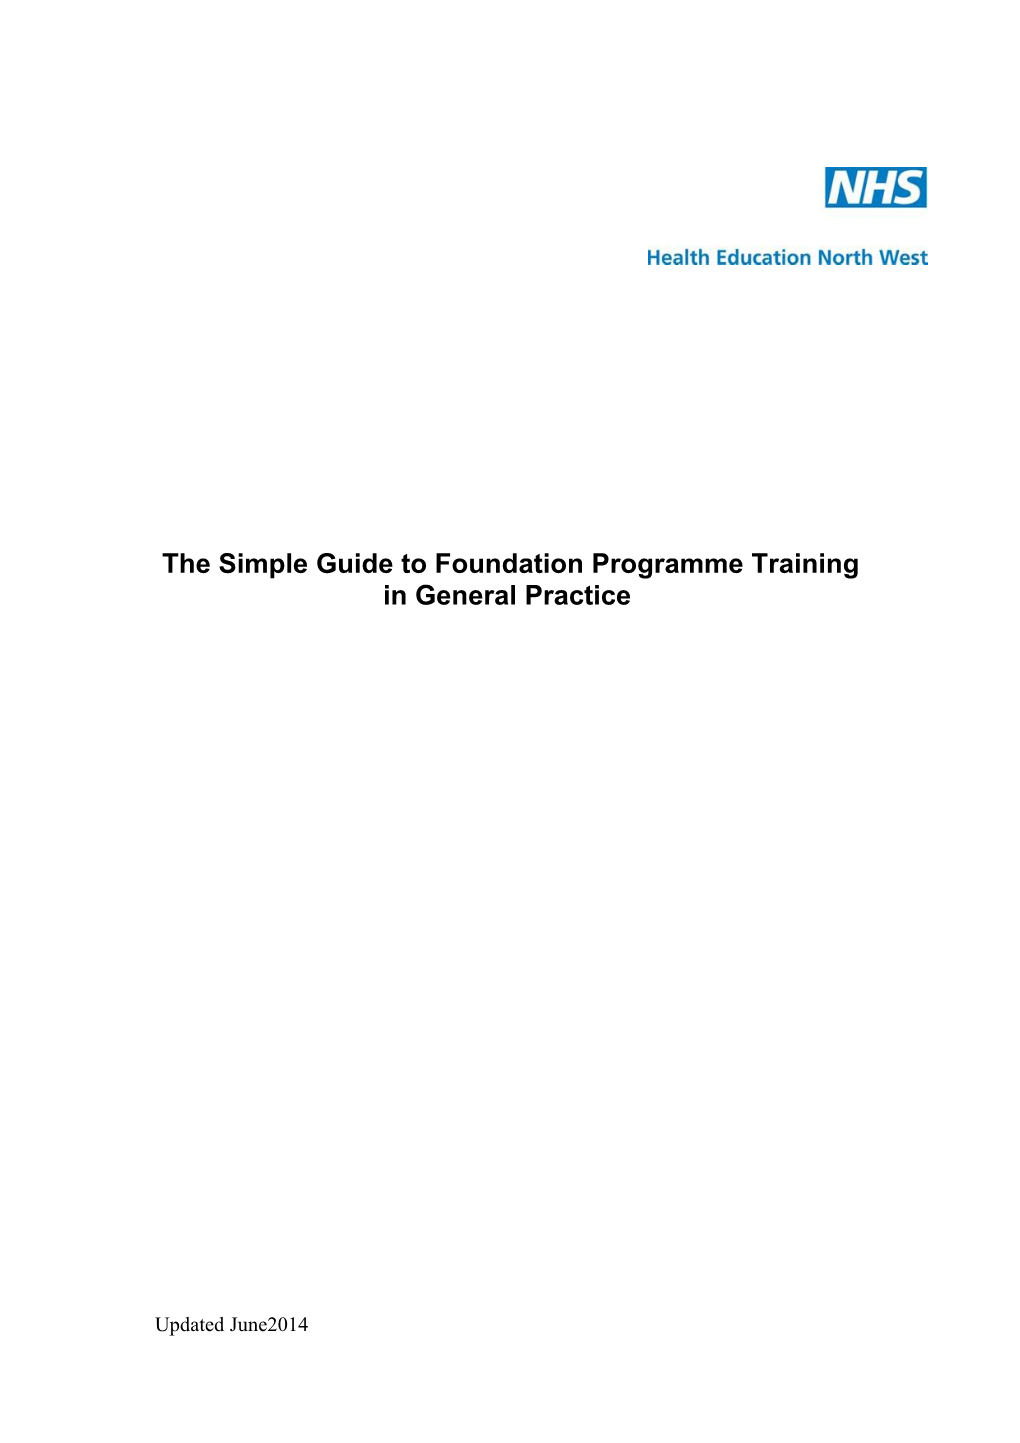 The Simple Guide to Foundation Programme Training in General Practice